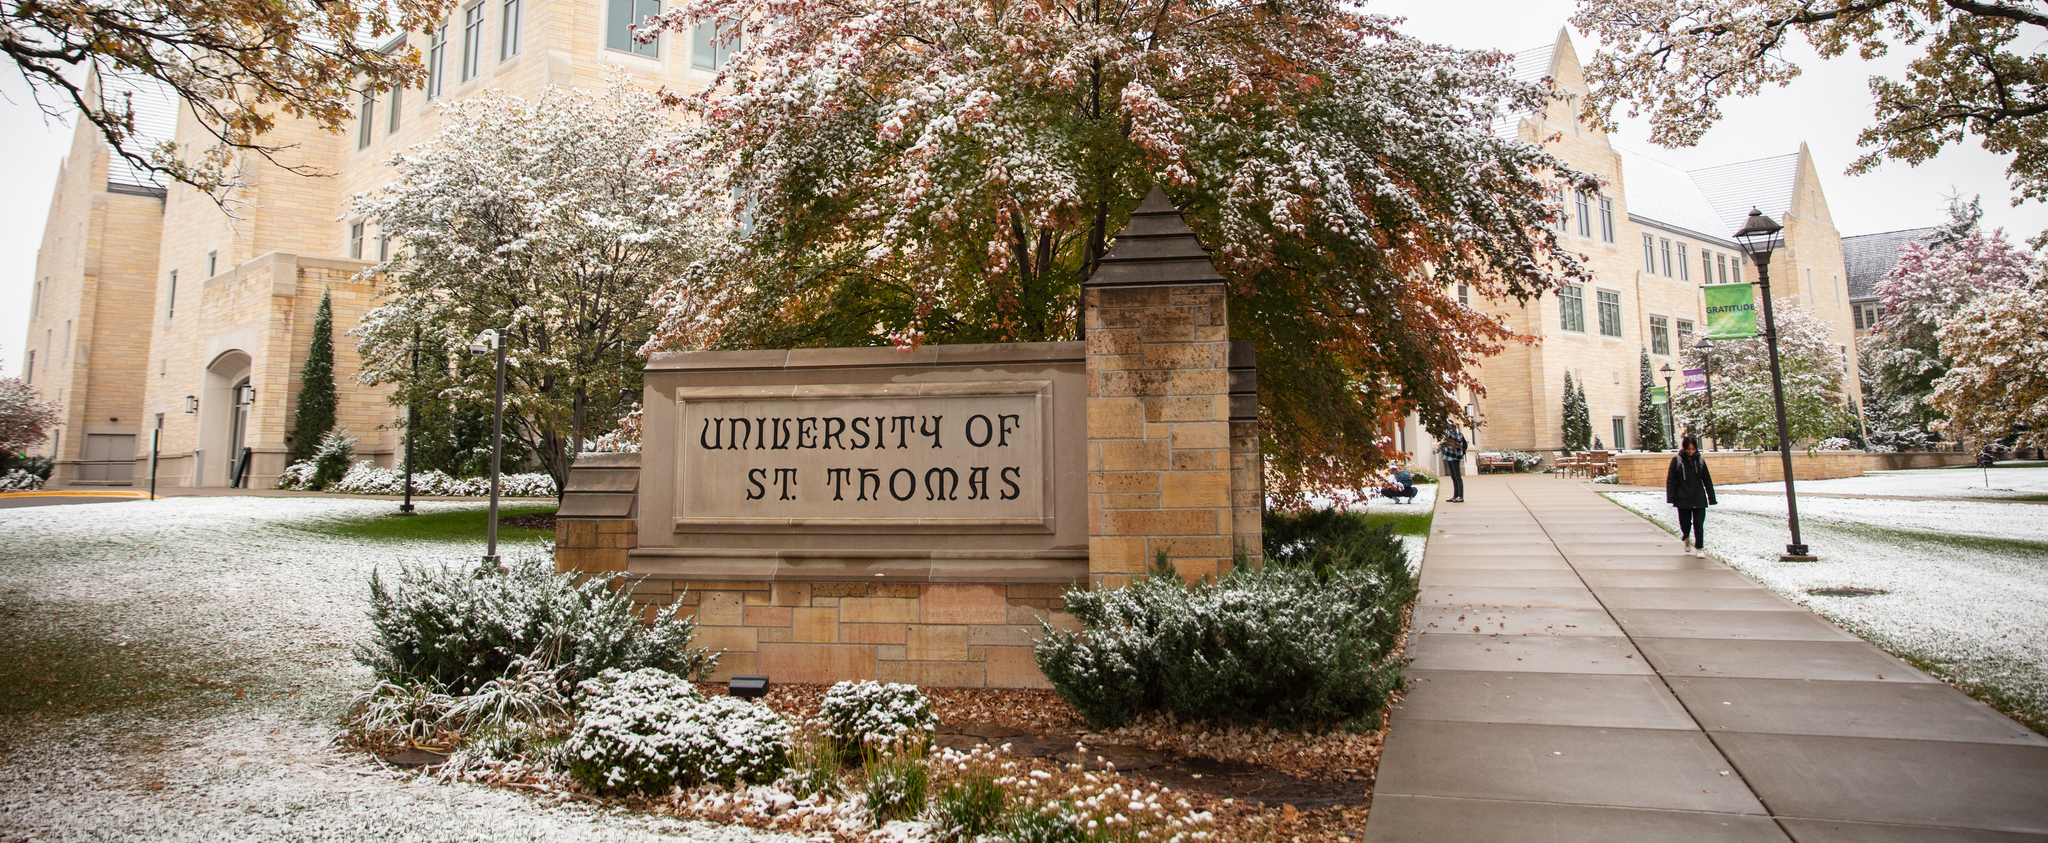 St. Thomas sign in front of Anderson Student Center with a light dusting of snow